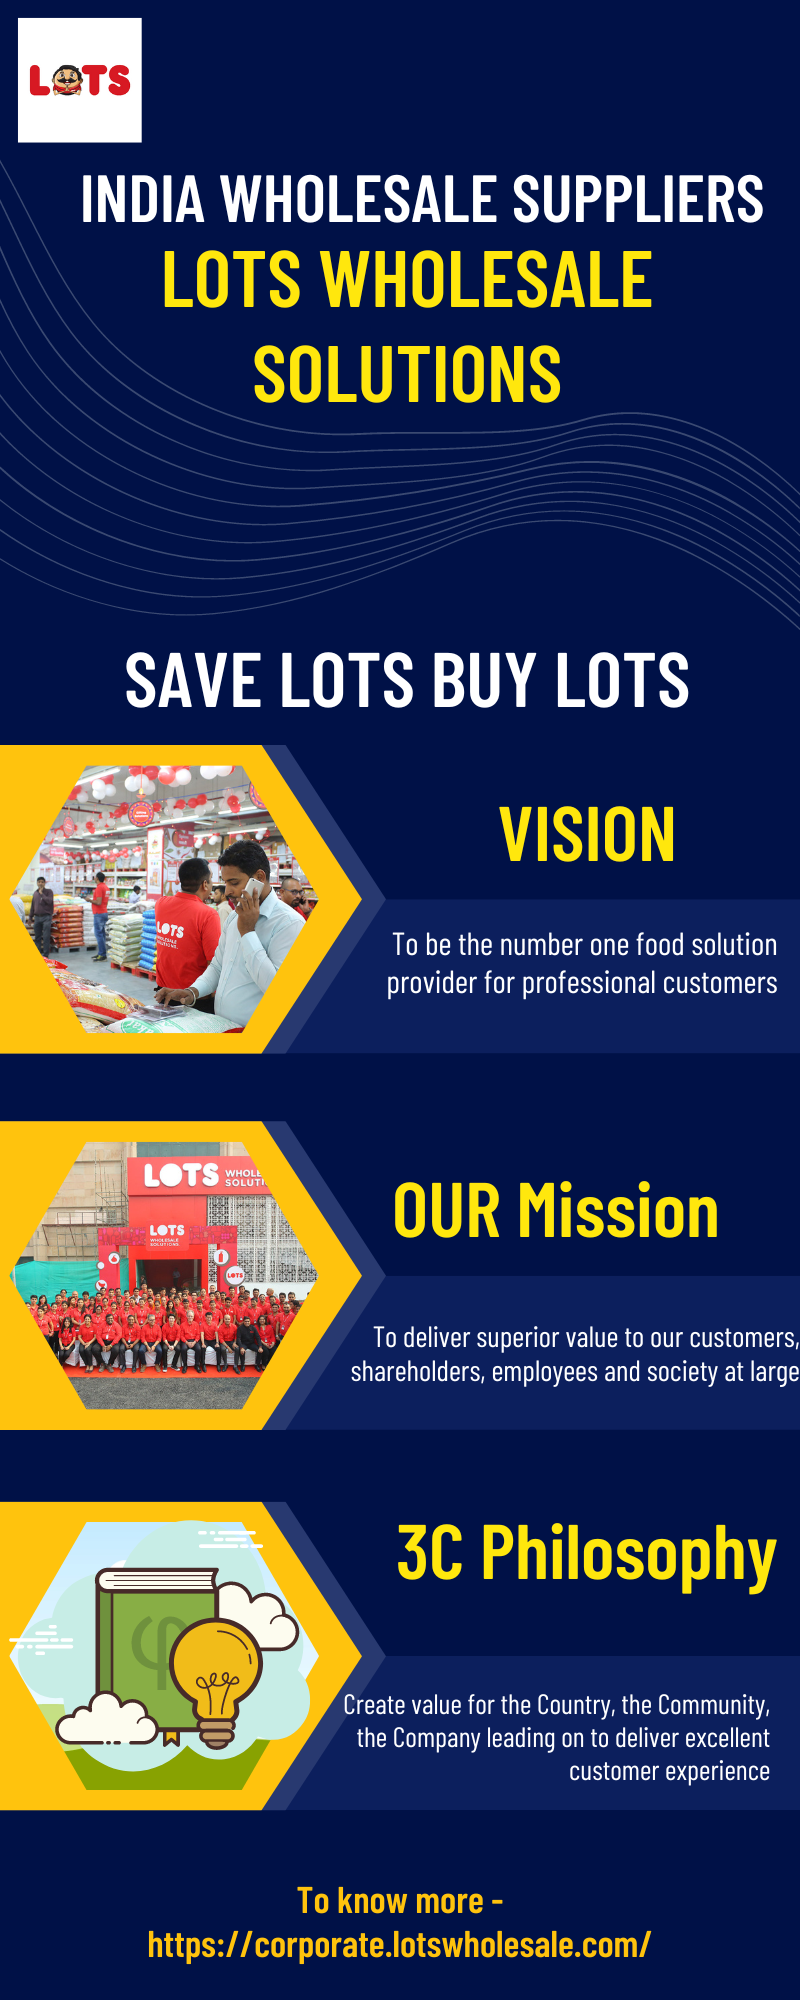 India Wholesale Suppliers- LOTS Wholesale Solutions